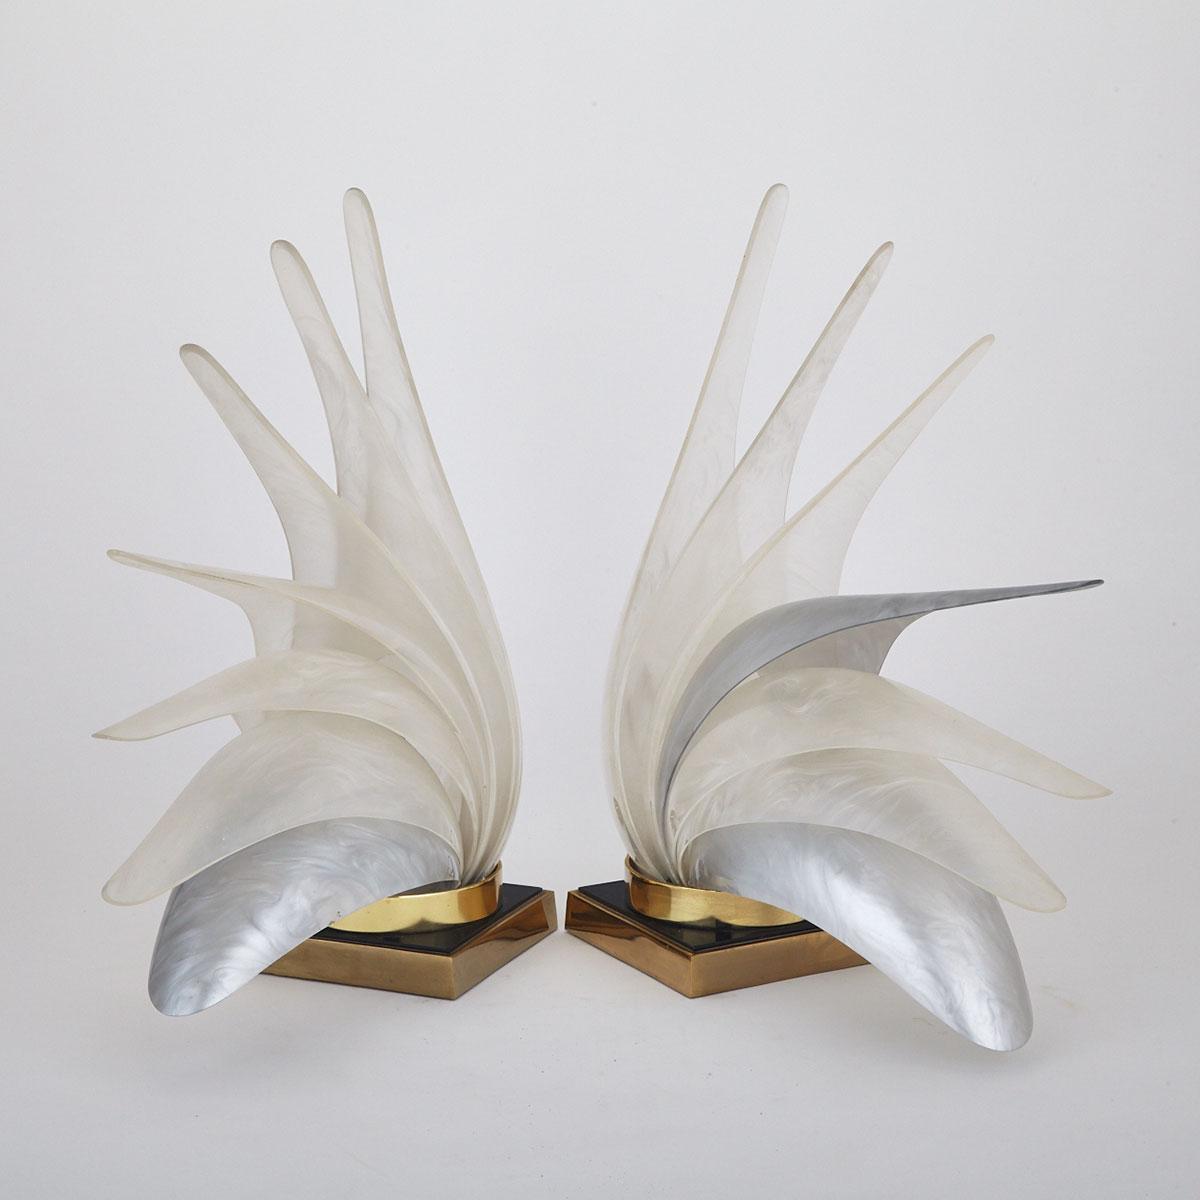 Pair of Contemporary Acrylic and Gilt Metal Table Lamps by Rougier of Canada, 1985